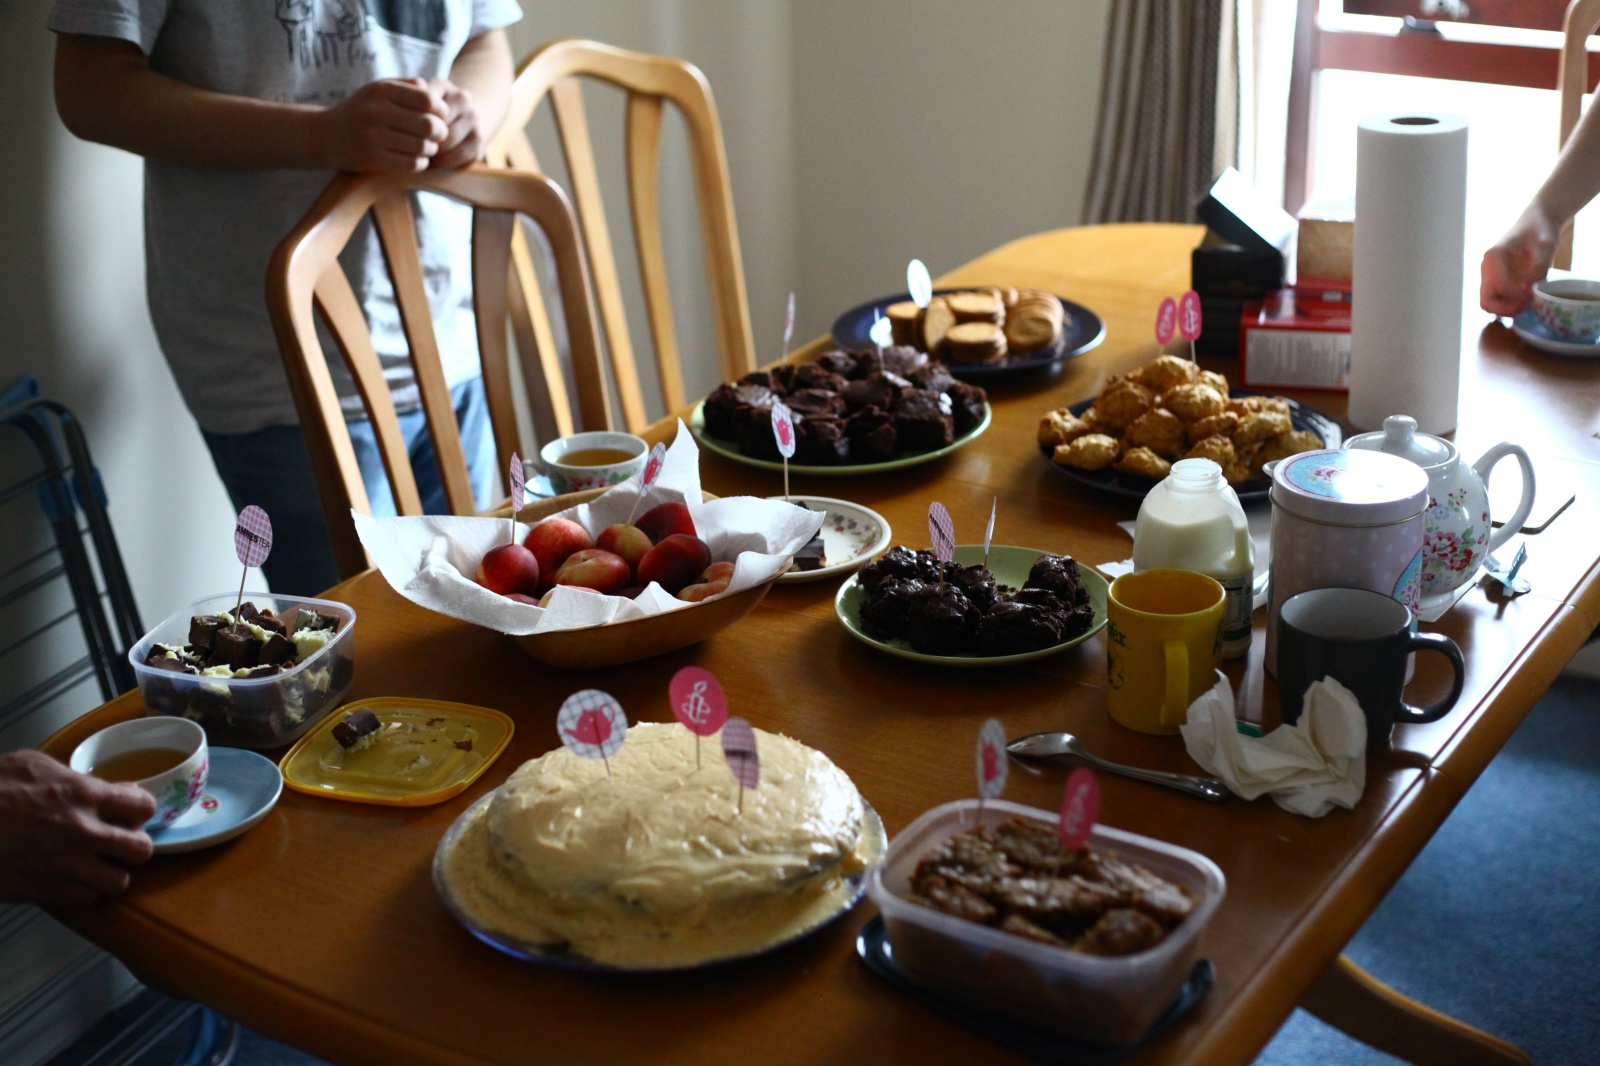 A table *full* of cakes biscuits sweets and tea!